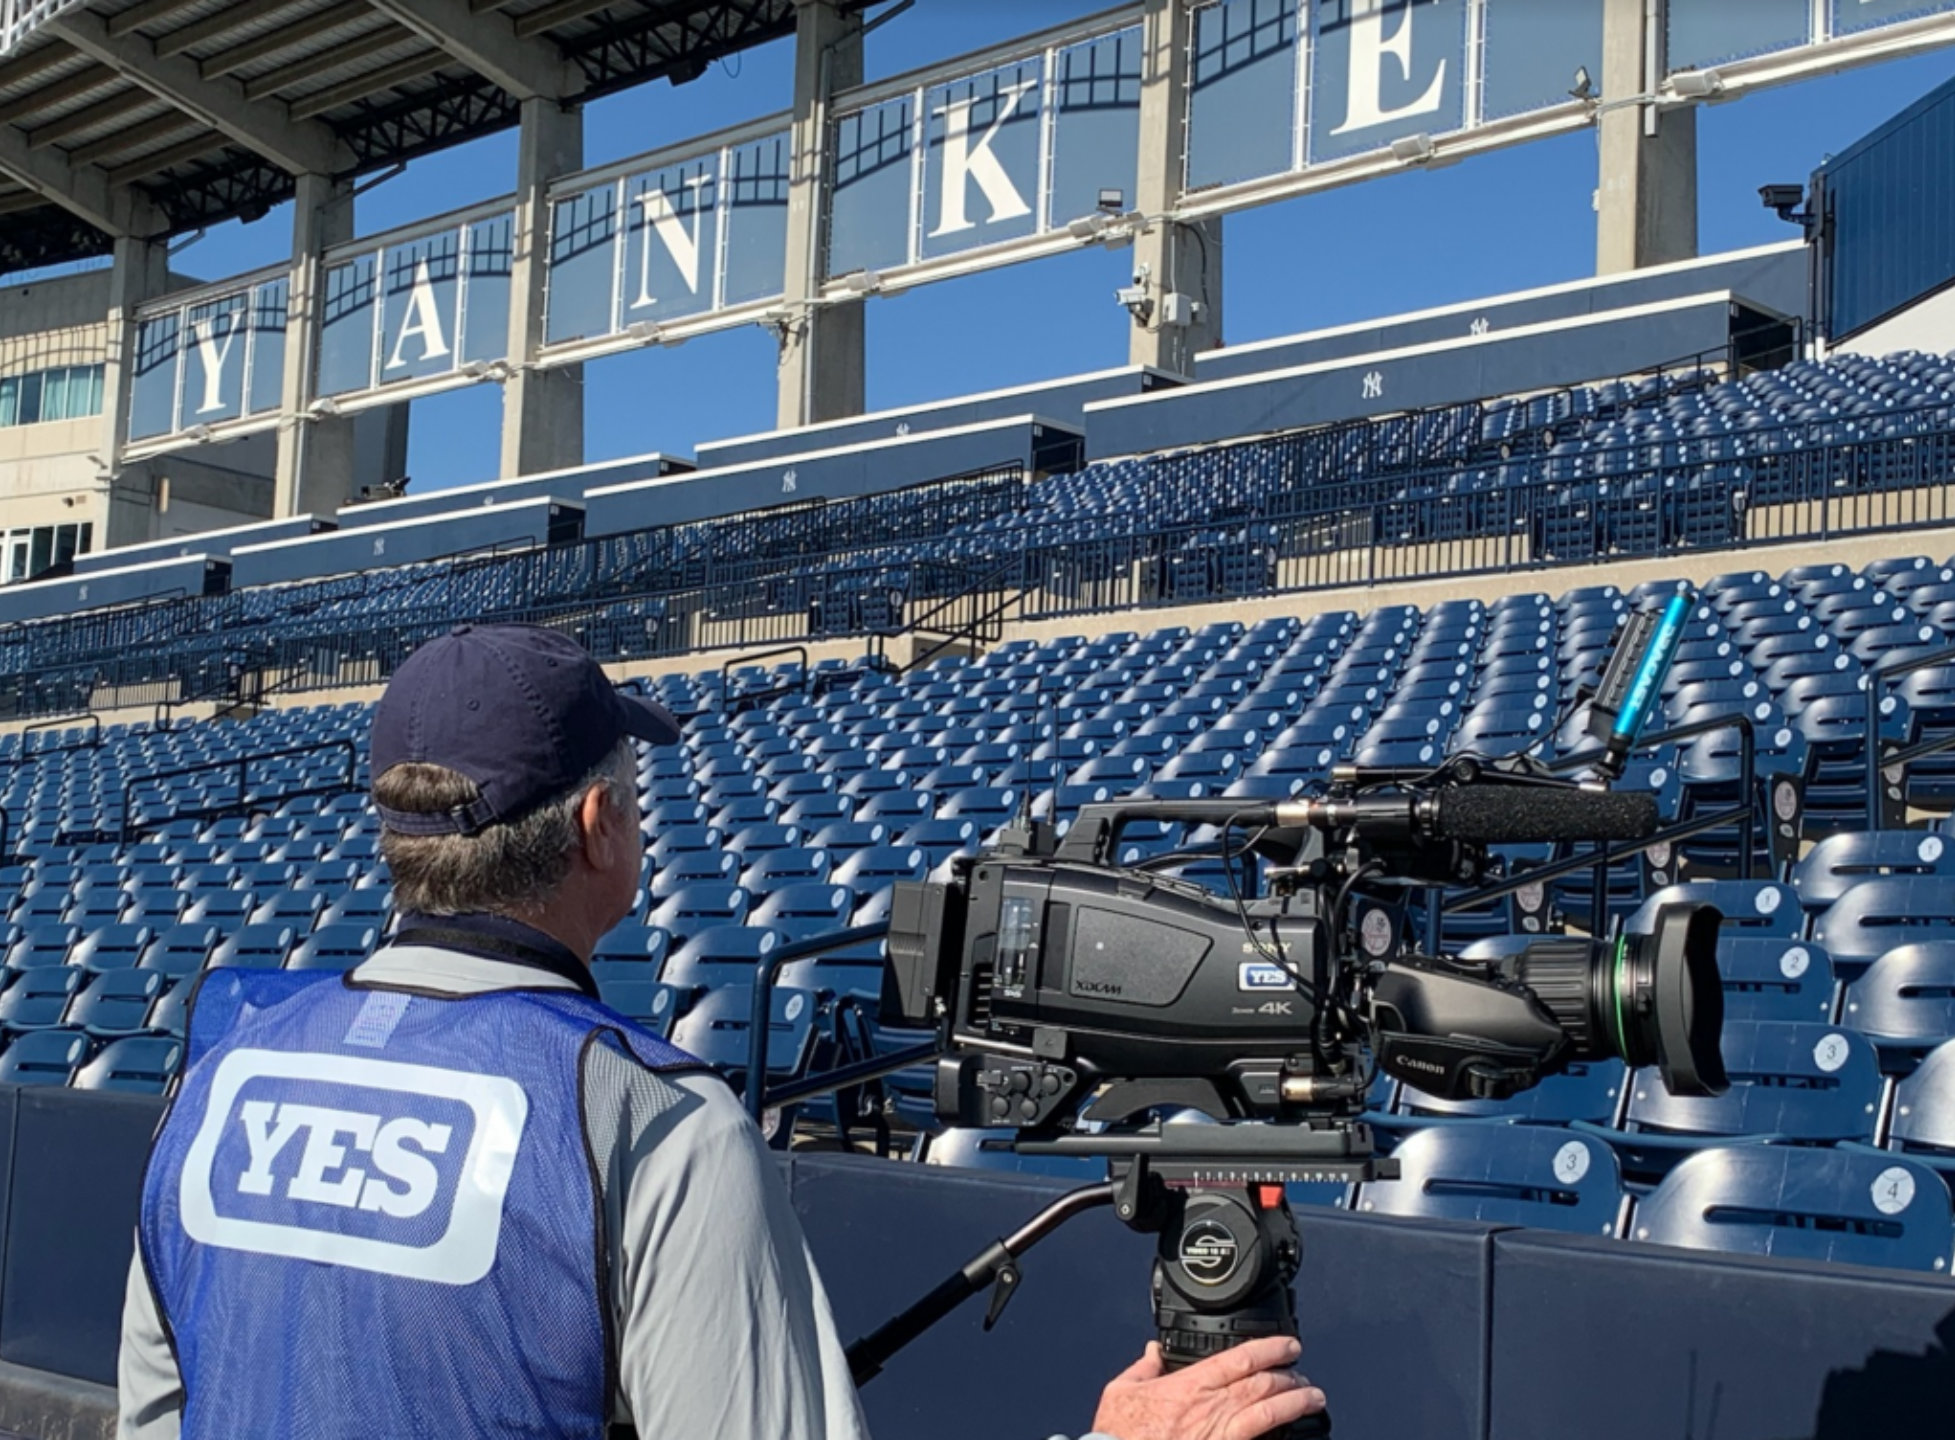 The YES Network uses Sony’s technology to engage audiences